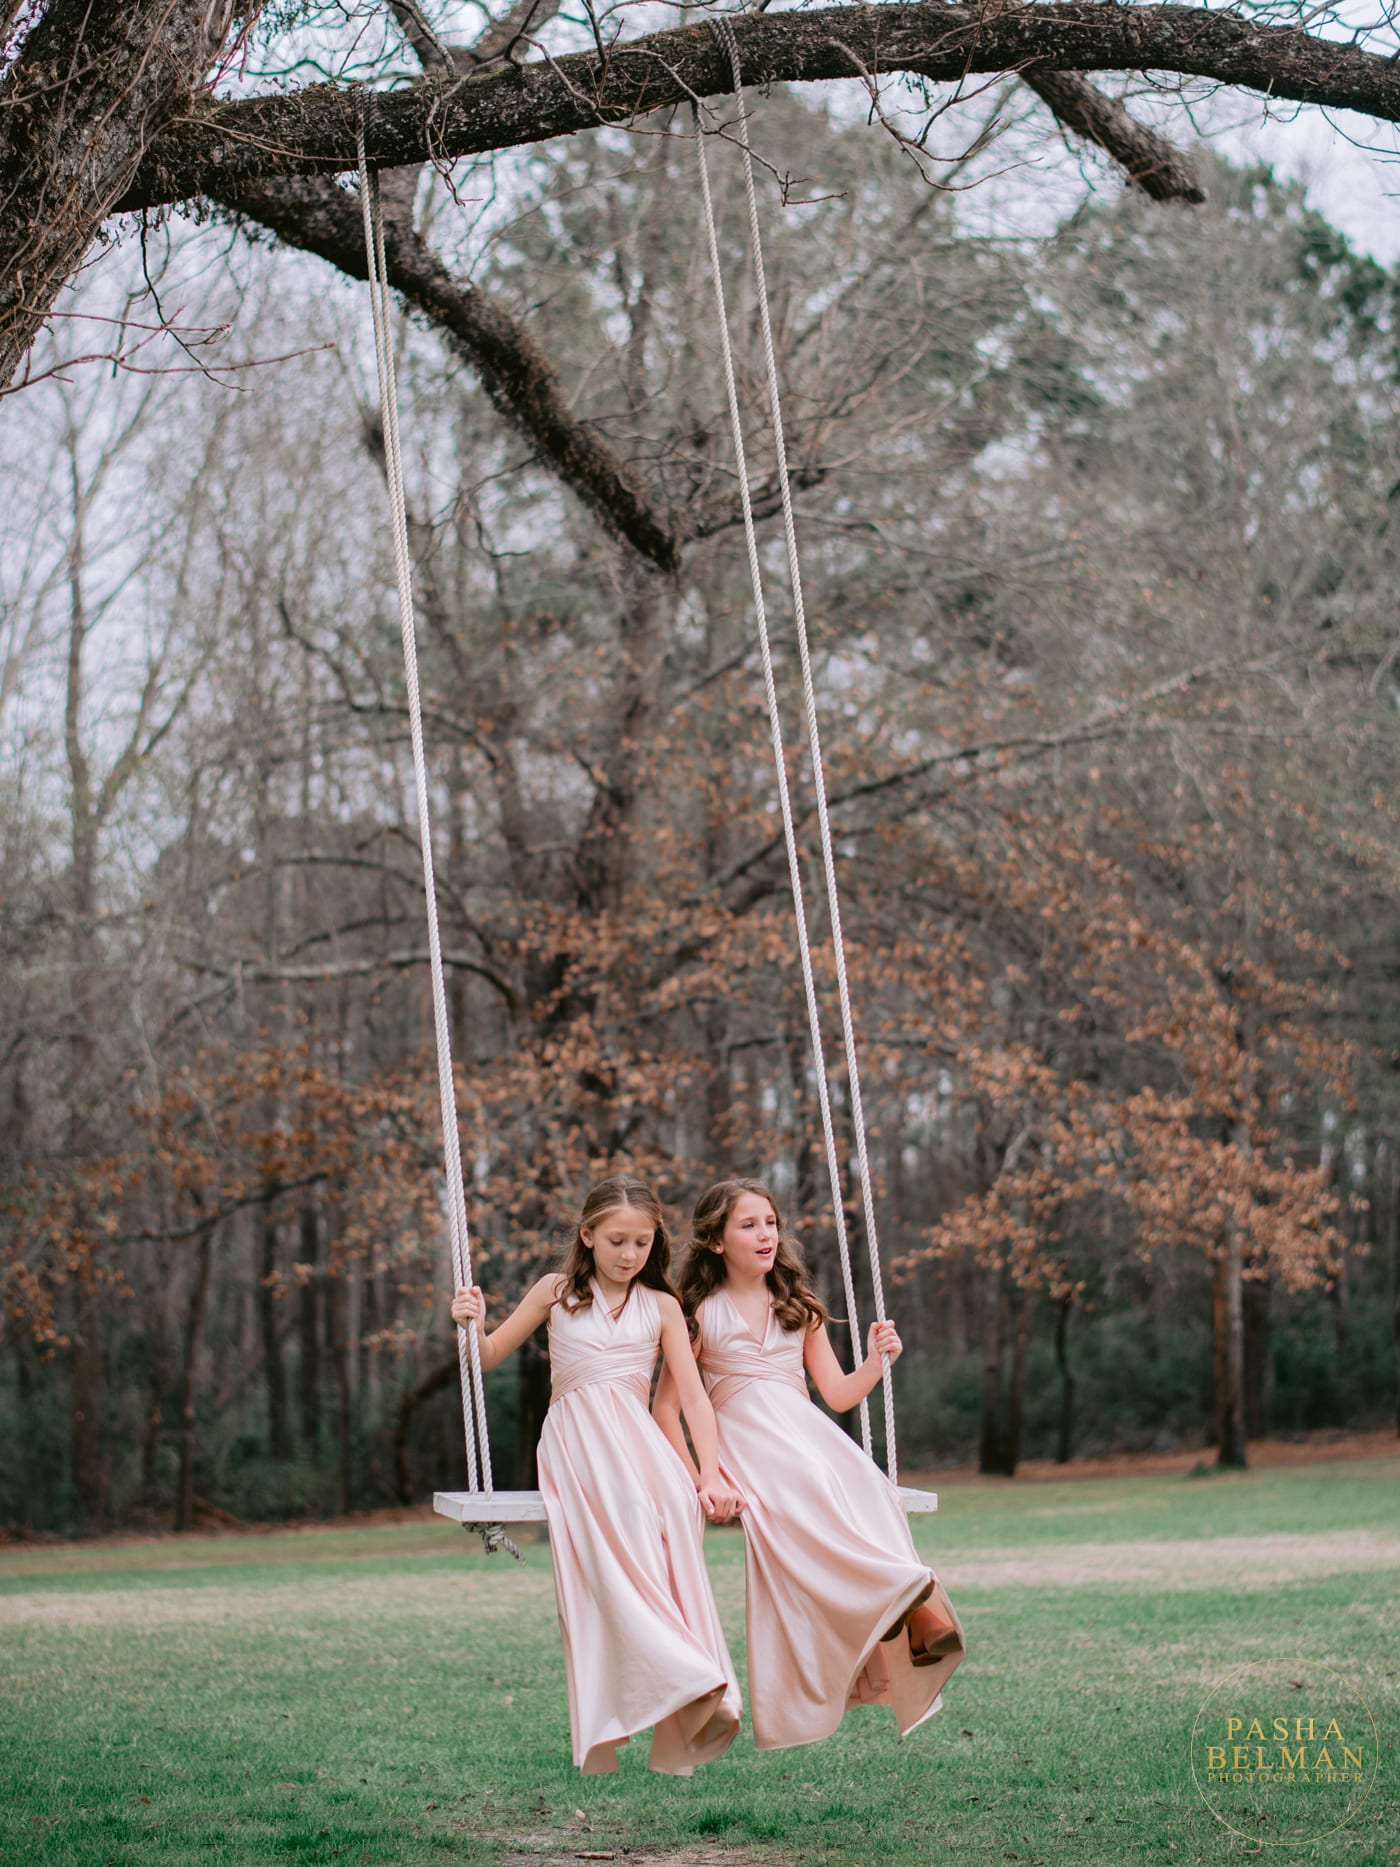 Wedding Pictures at Wildberry Farm in SC